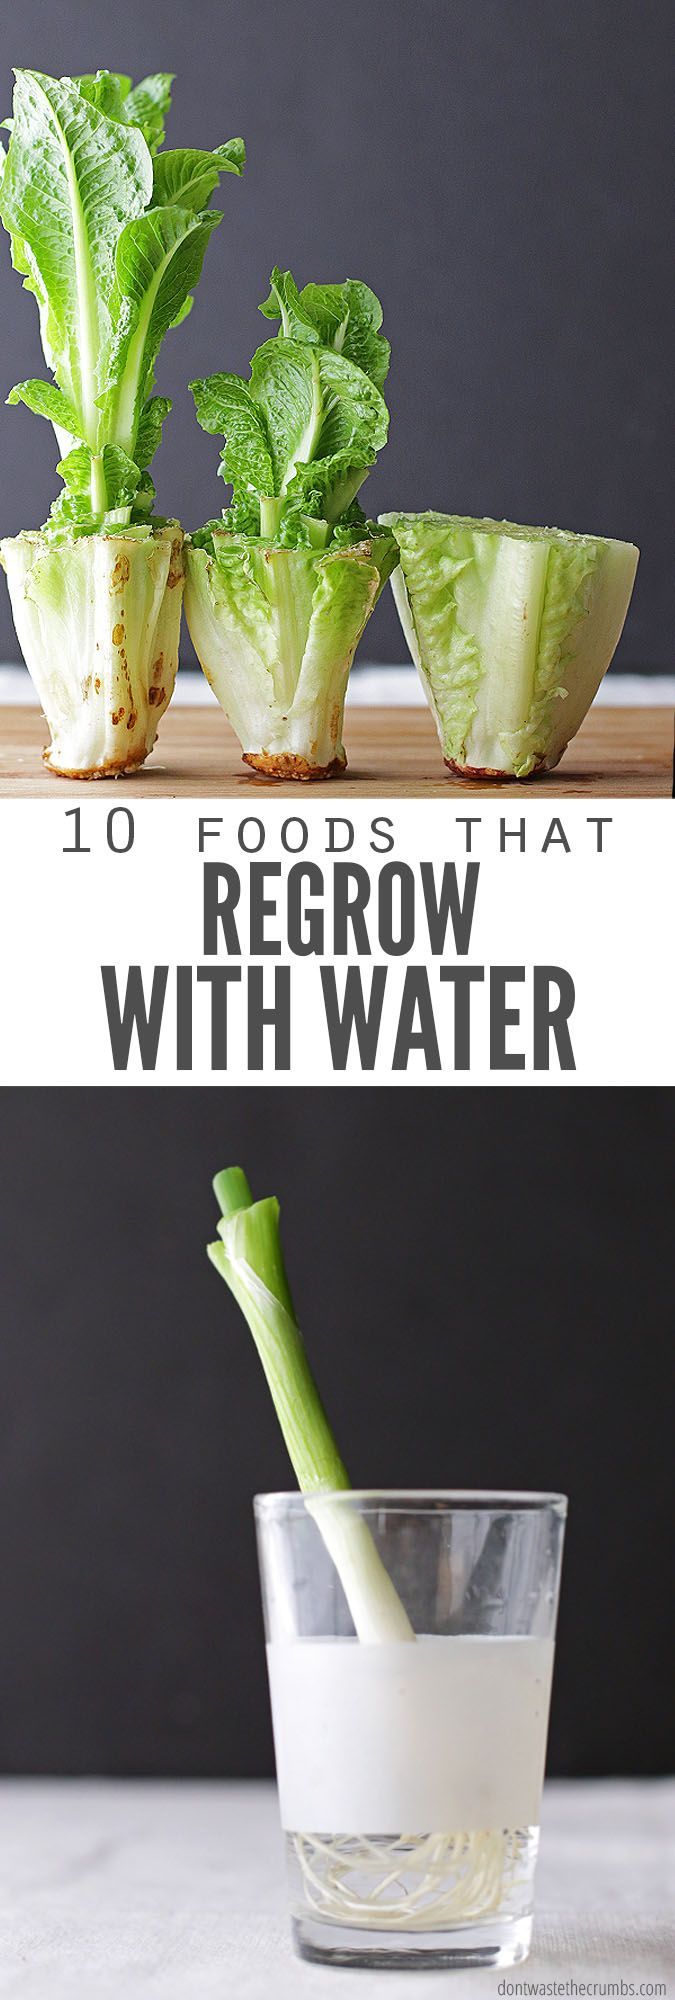 How to Regrow Food in Water: 10 Foods that Regrow Without Dirt -   17 plants Vegetables from scraps ideas